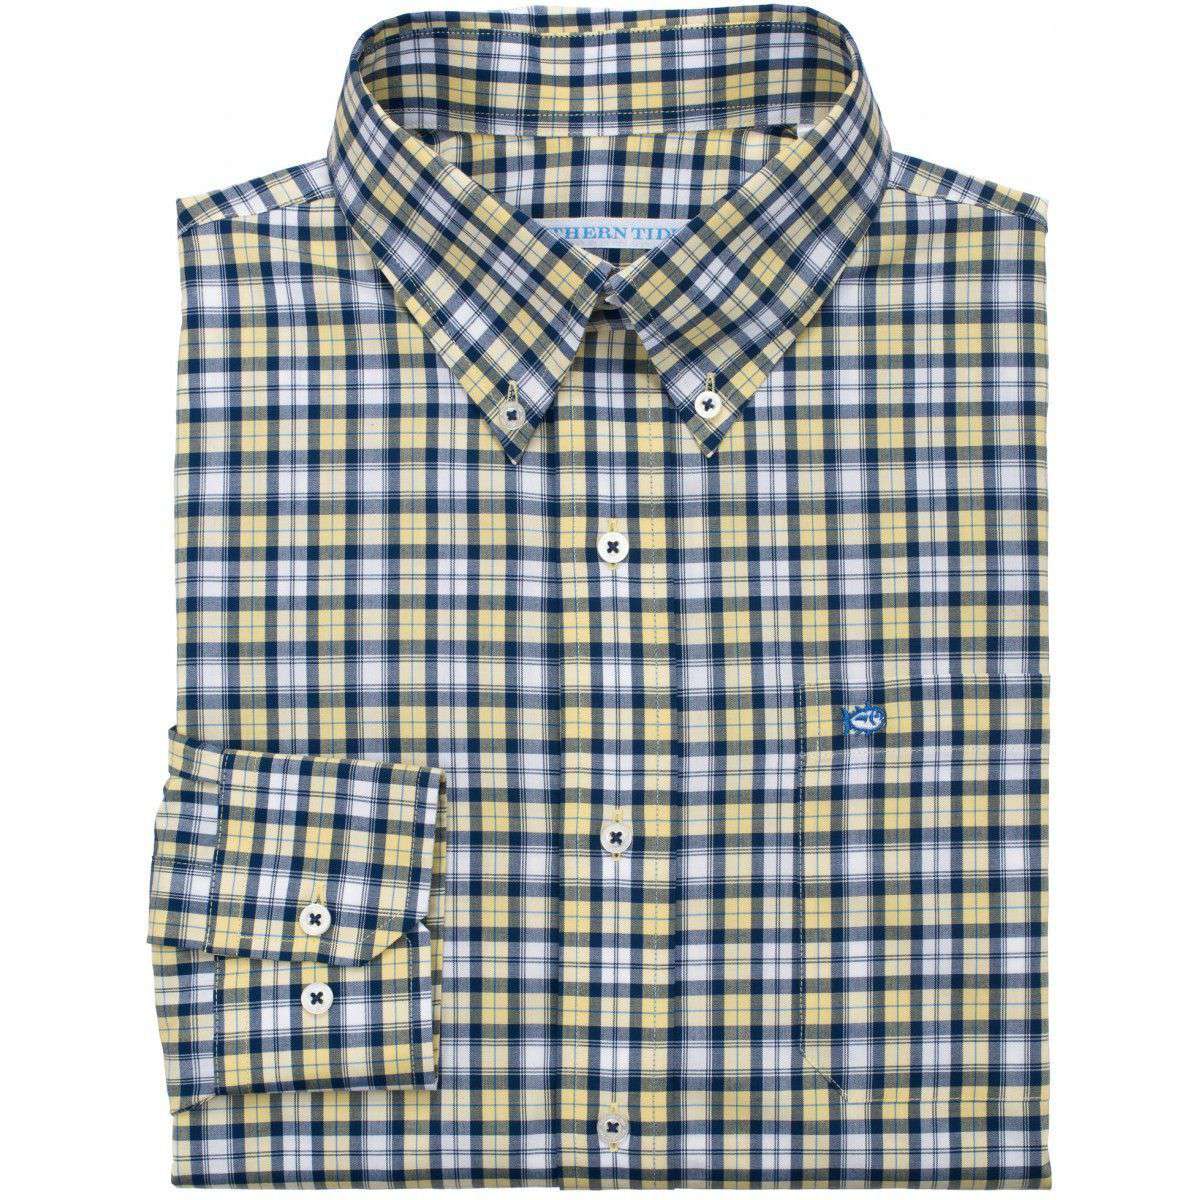 Sonar Plaid Classic Fit Sport Shirt in Sunshine by Southern Tide - Country Club Prep